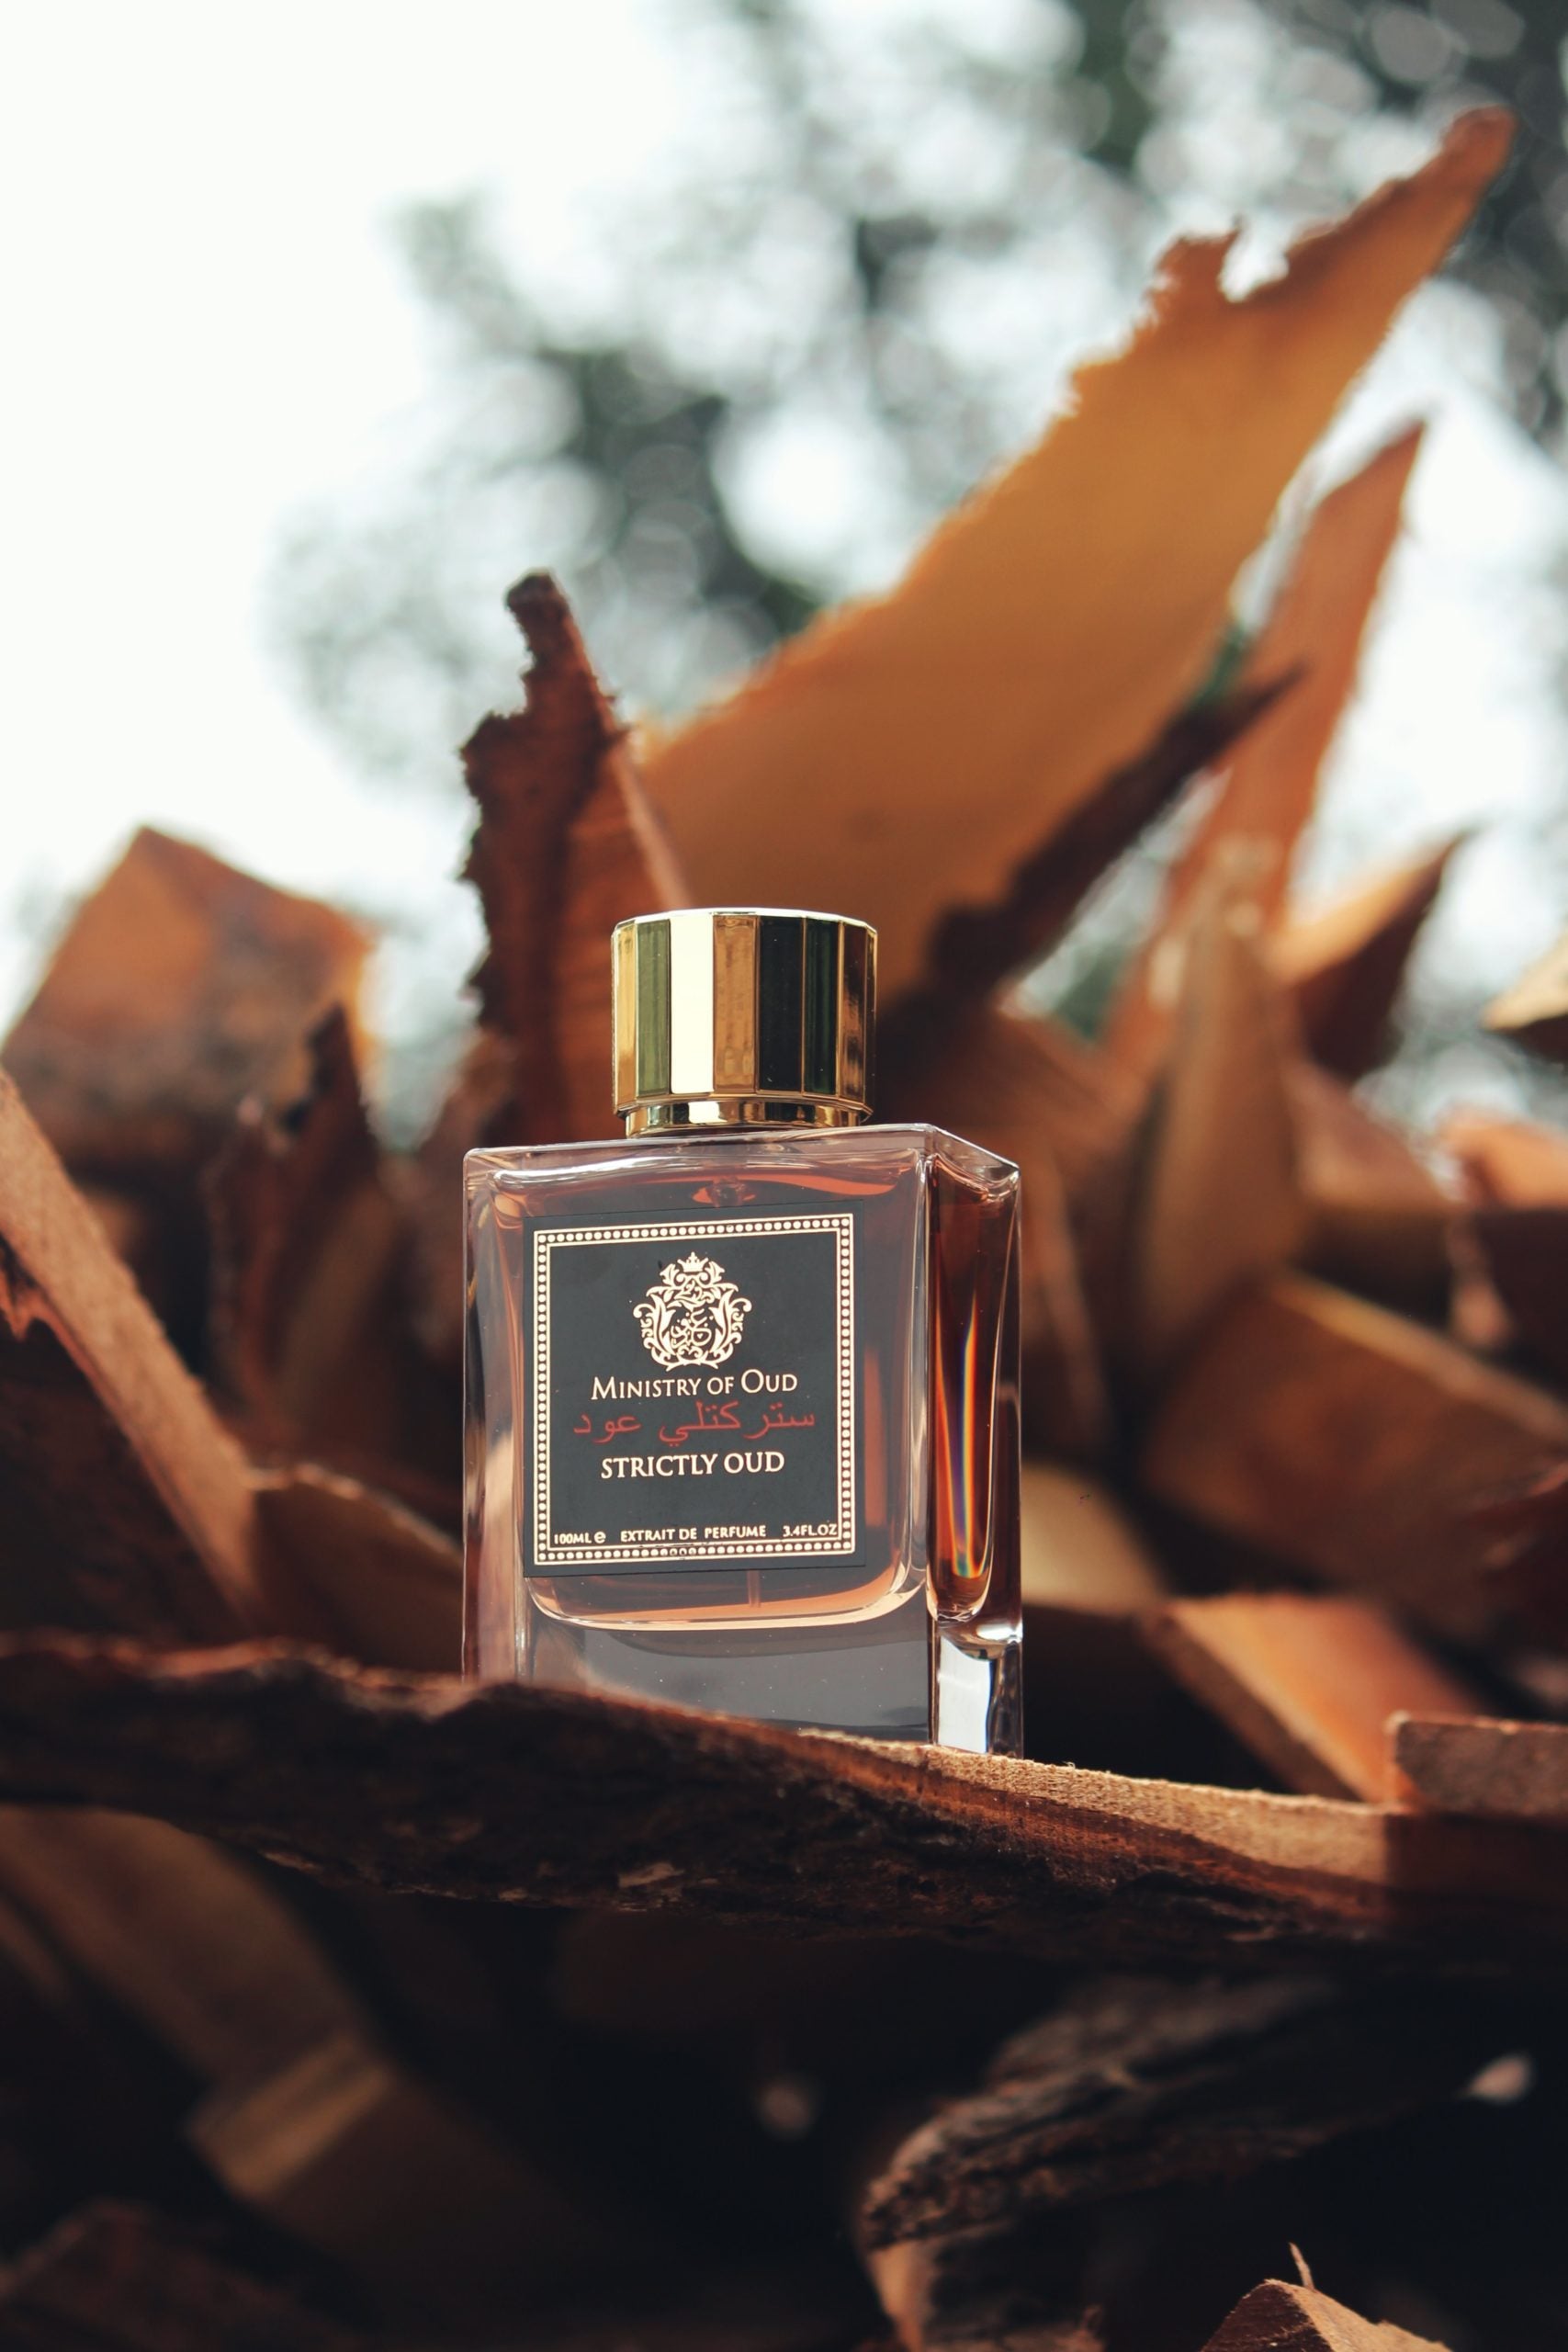 MINISTRY OF OUD-STRICTLY OUD Fragrance for Men & Women